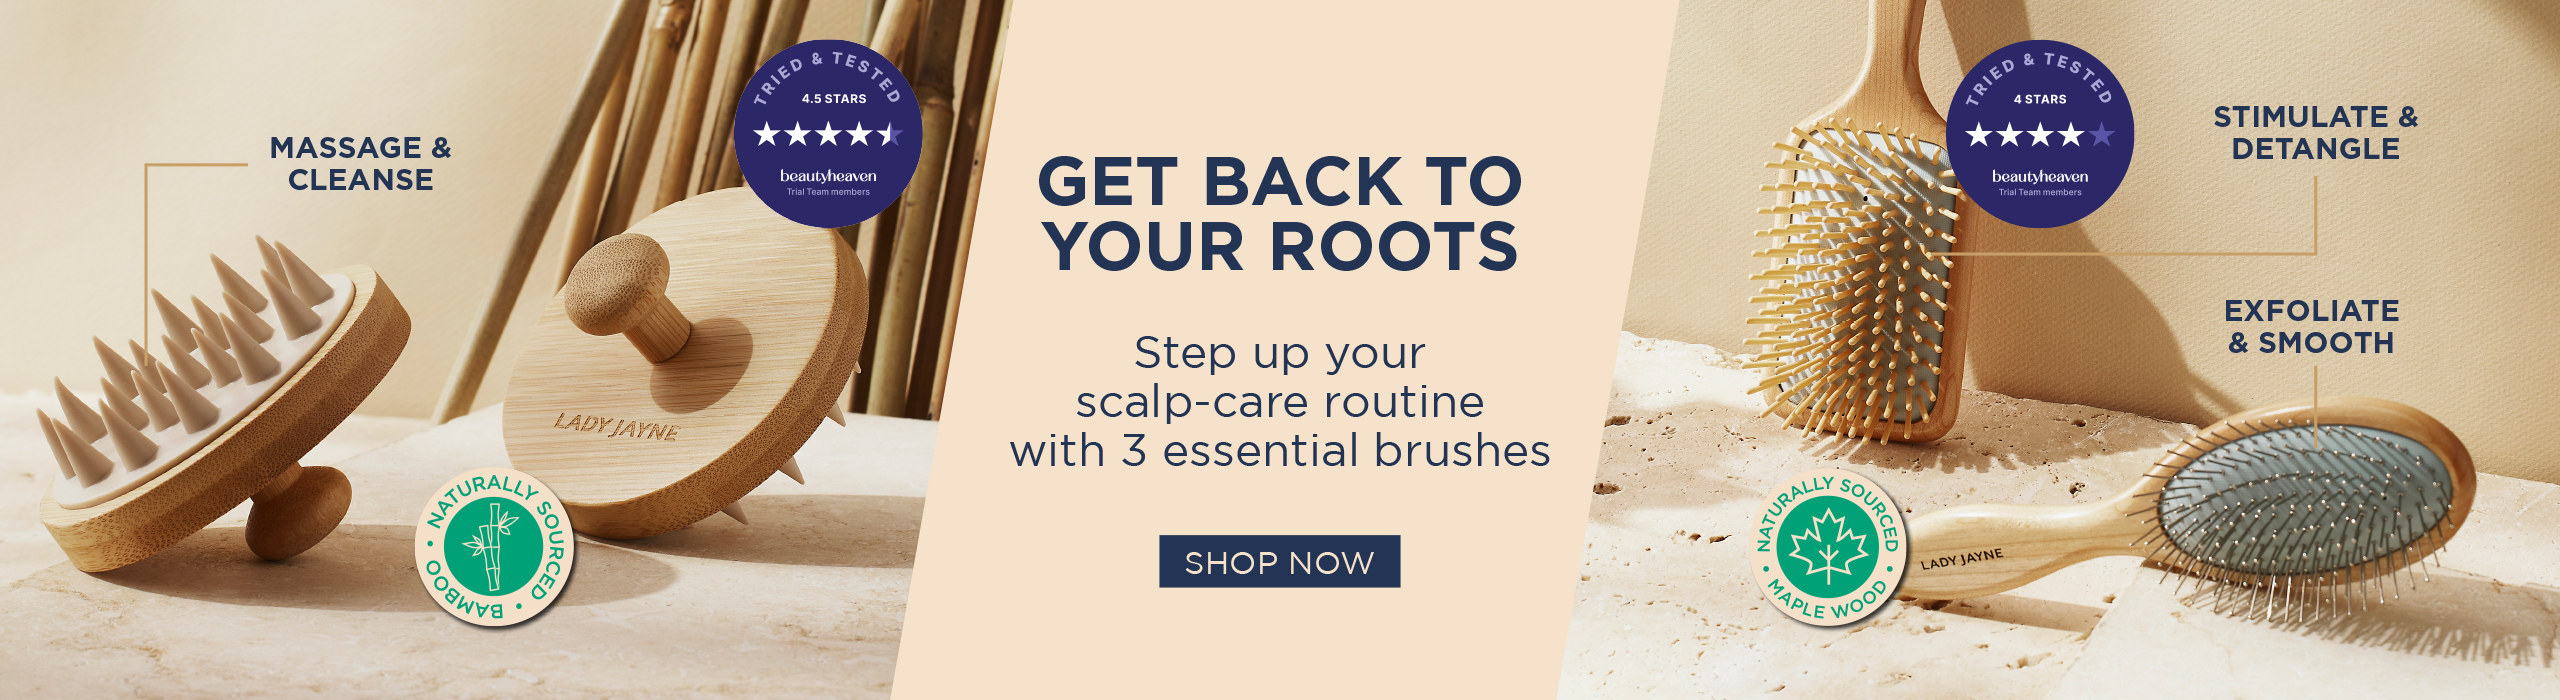 Step up your scalp routine with 3 essential brushes